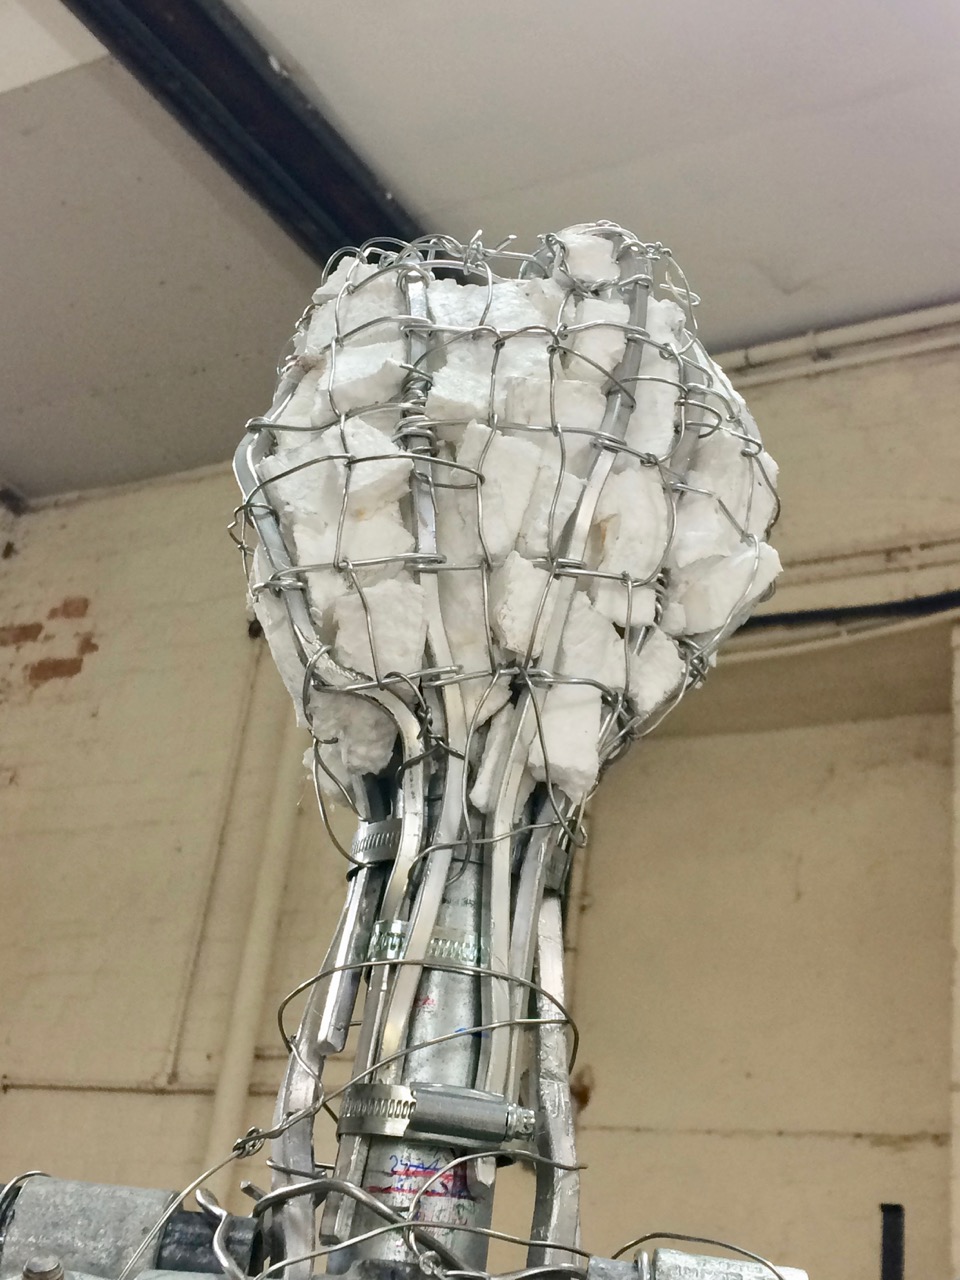 Emmelines head armature - sculpture and photo by Hazel Reeves